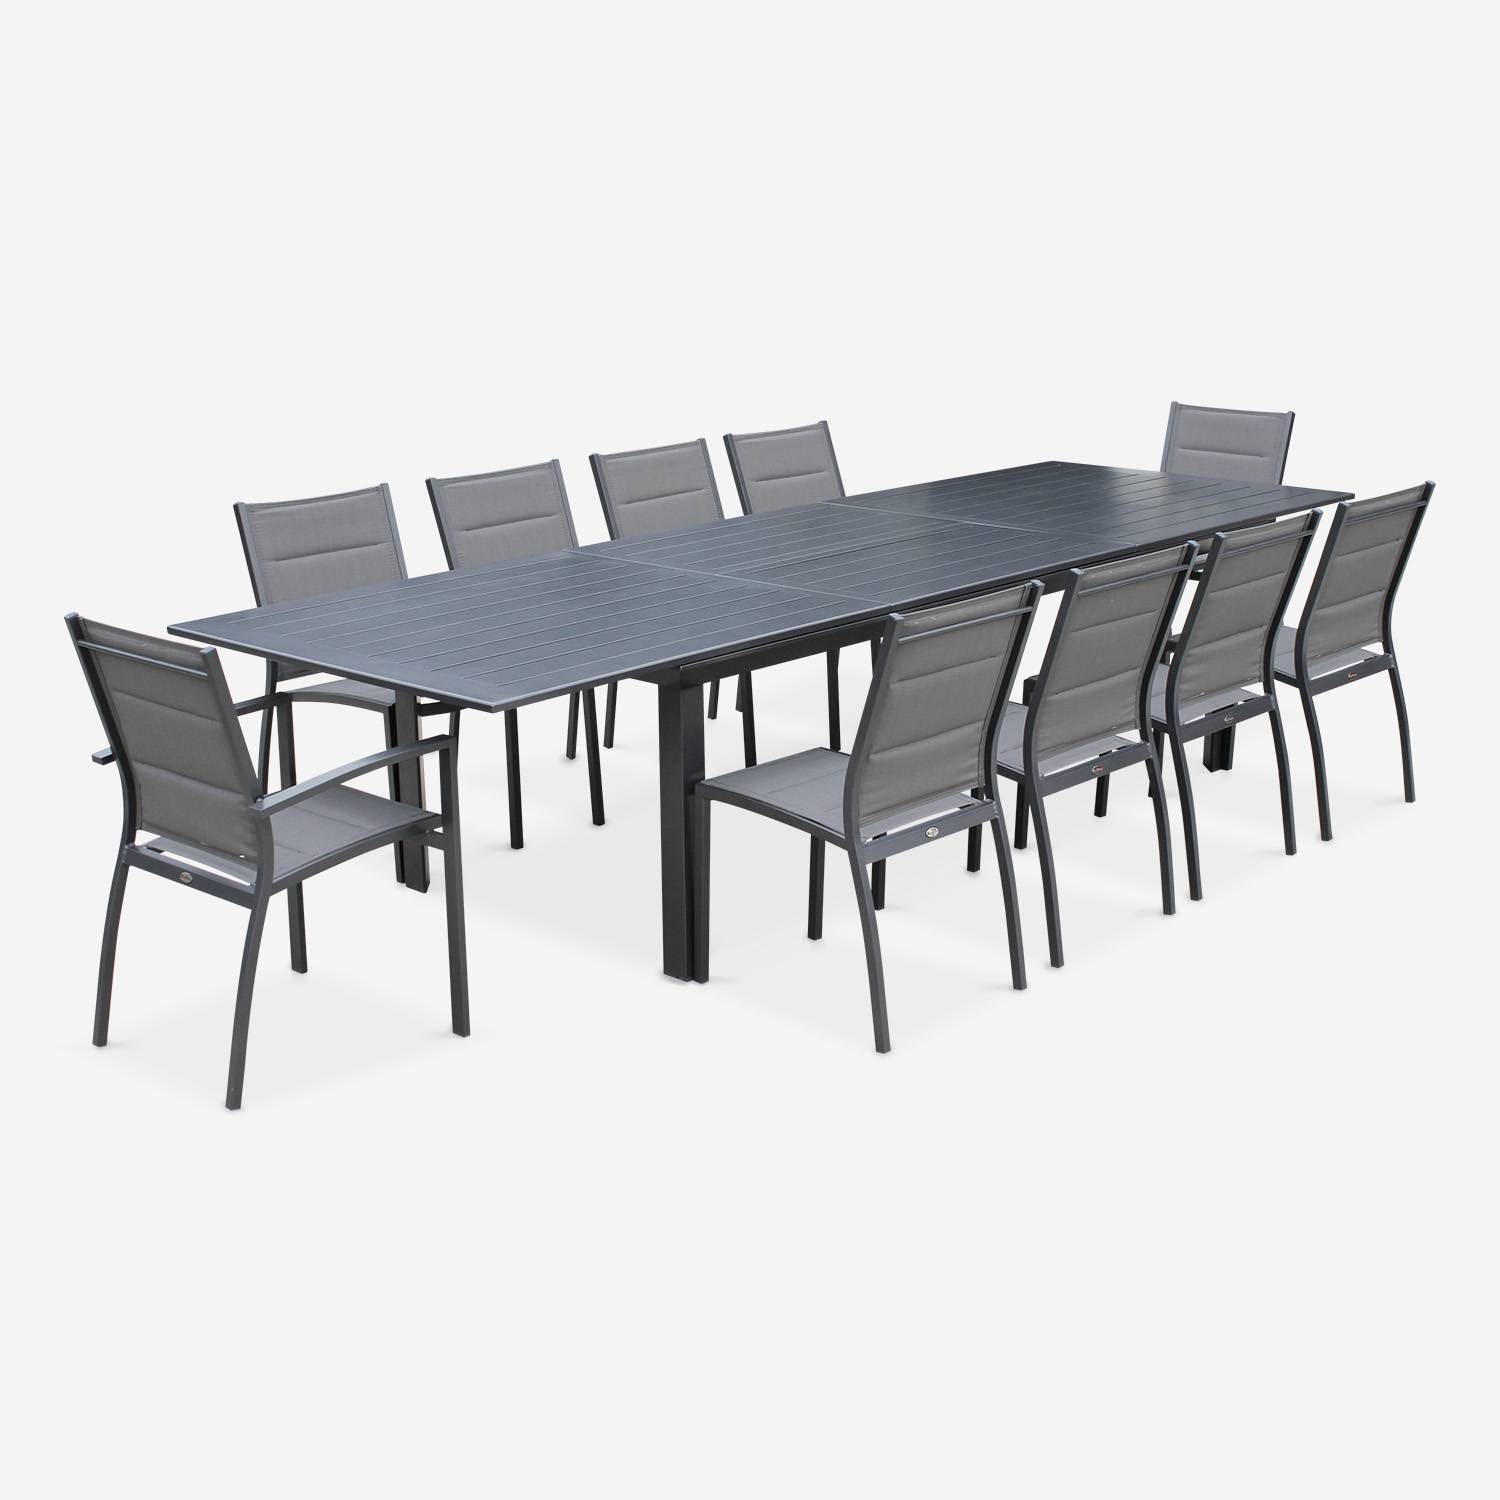 10-seater garden dining set, extendable 235-335cm aluminium table, 8 chairs and 2 armchairs - Odenton - Anthracite frame, Charcoal Grey textilene Photo2